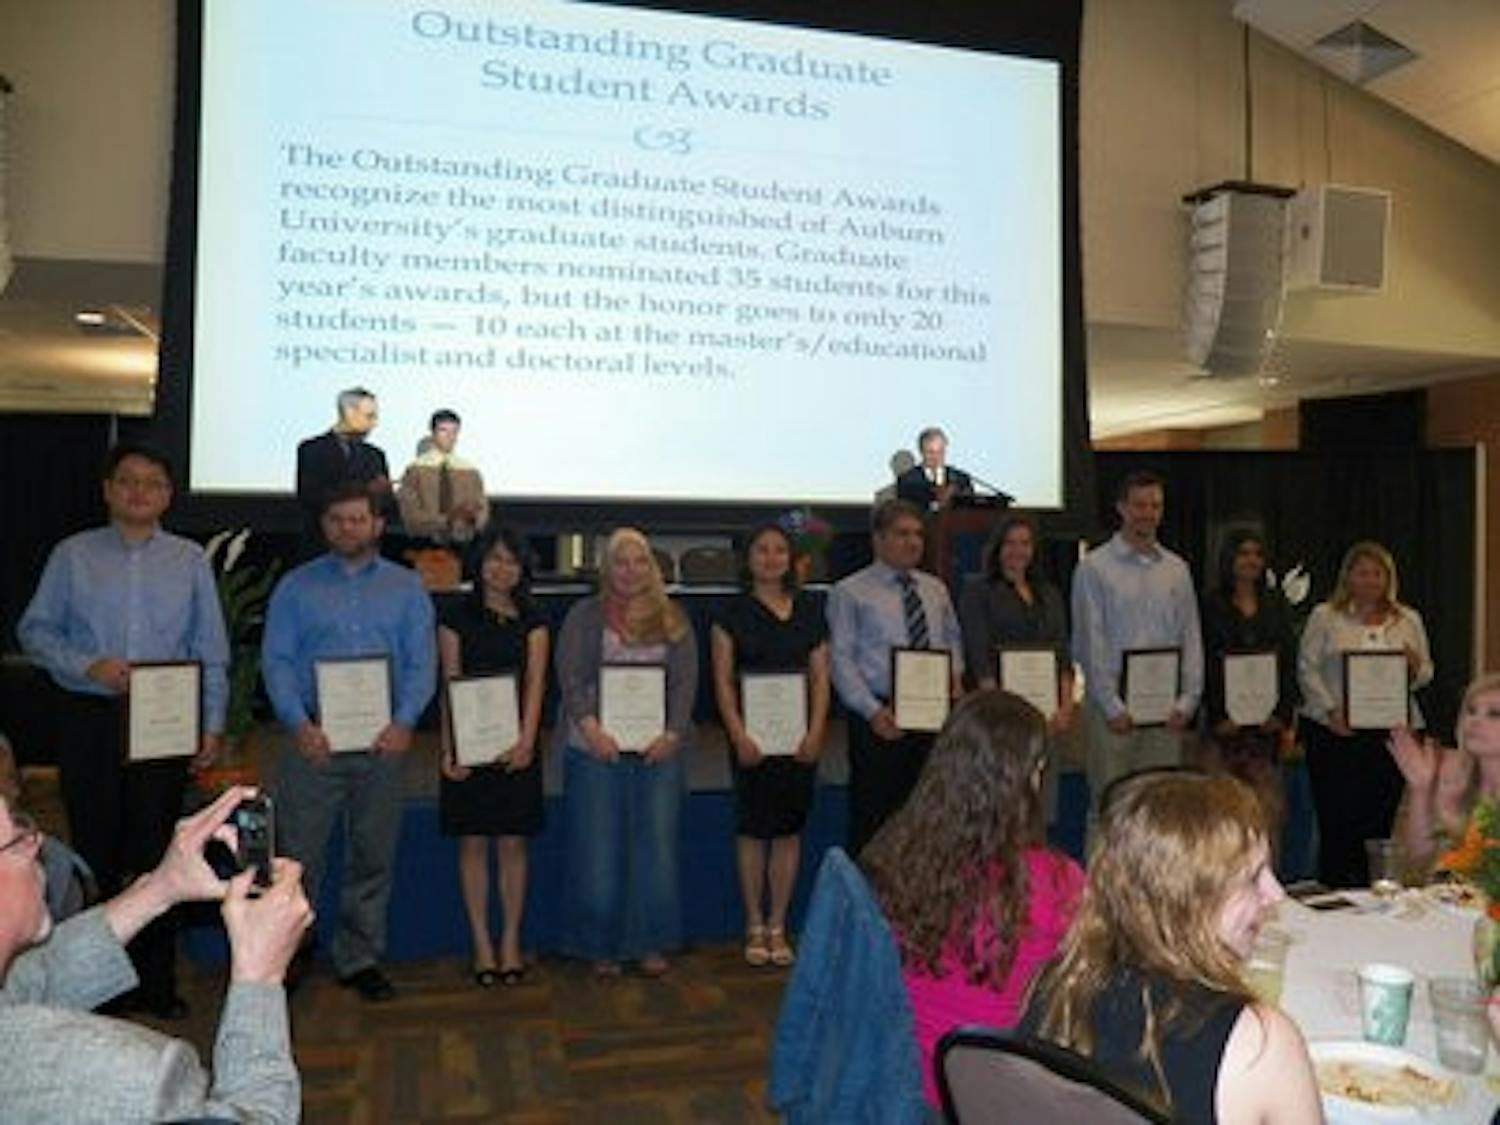 Recipients of the Outstanding Graduate Student Awards for doctoral students are (from left) Xiu-Lei Mo, David Branscomb, Yating Chai, Leanne Dillard, Ting Li, Mahmoud Moeini Sedeh, Laura Morgan, Benjamin Newcomer, Hema Ramsurn and Kimberly Smith. (COntributed by CHris Anthony)